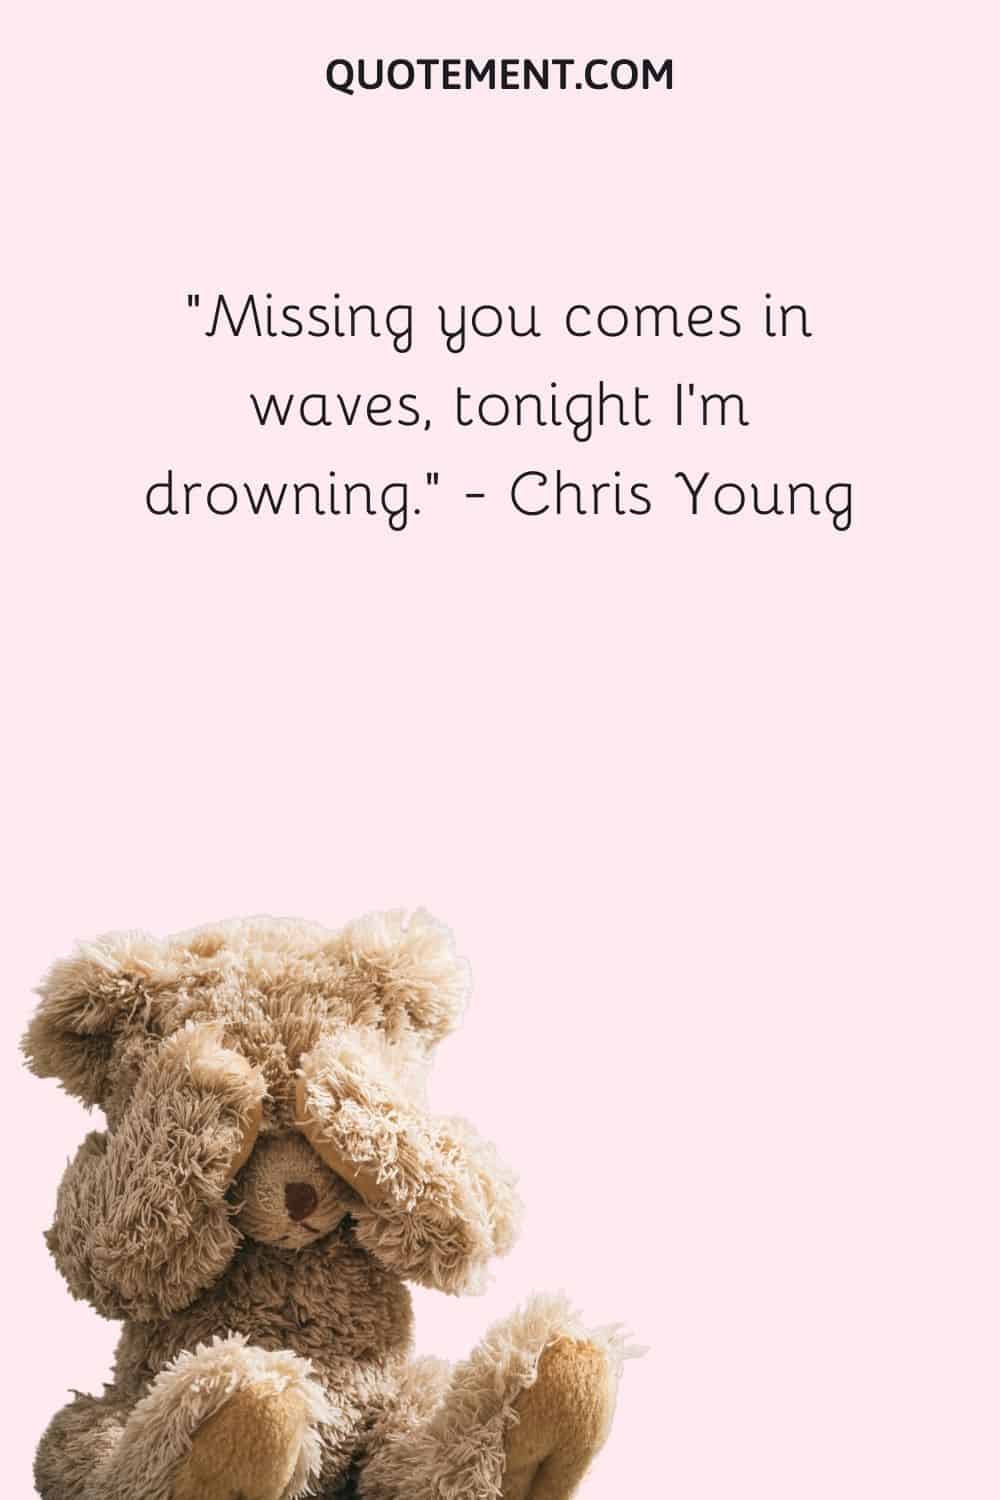 Missing you comes in waves, tonight I'm drowning. — Chris Young